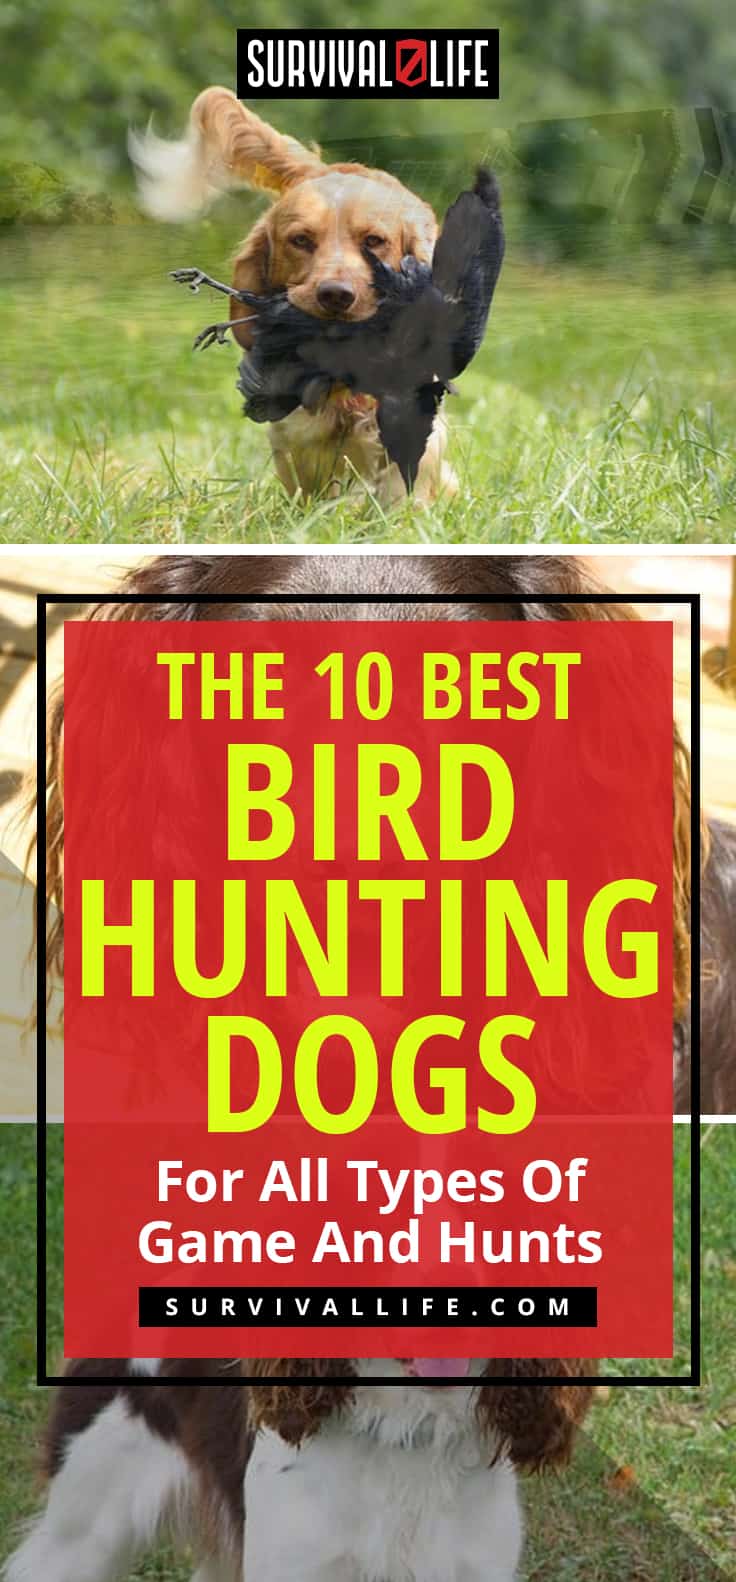 The 10 Best Bird Hunting Dogs For All Types Of Game And Hunts